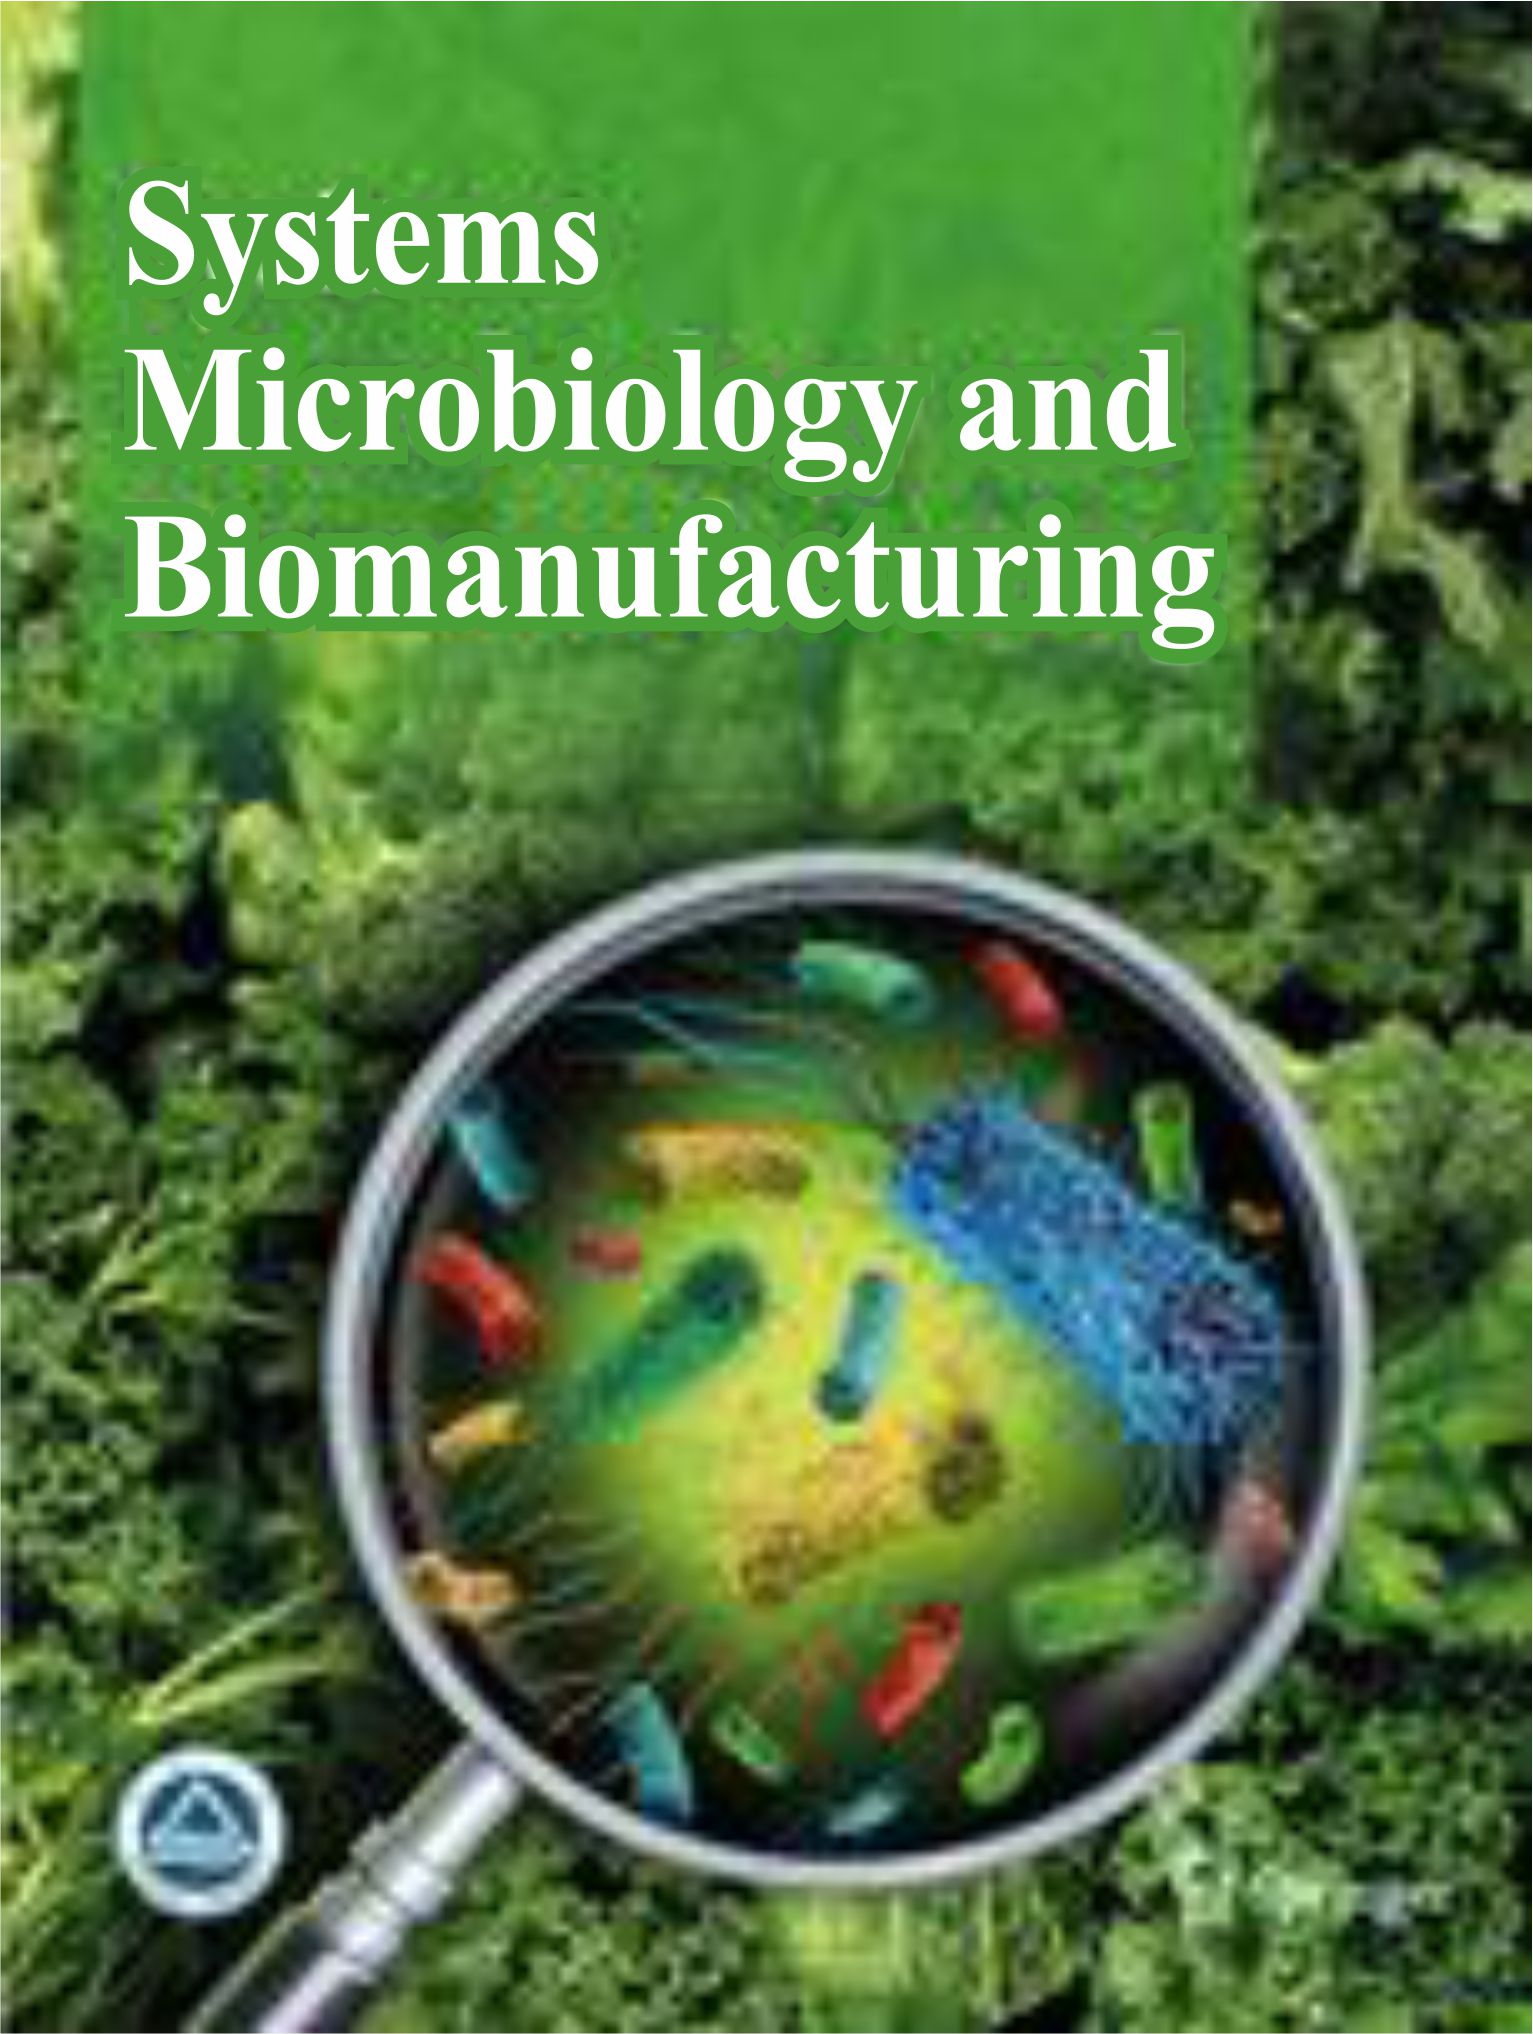 Systems Microbiology & Biomanufacturing (Springer Nature)